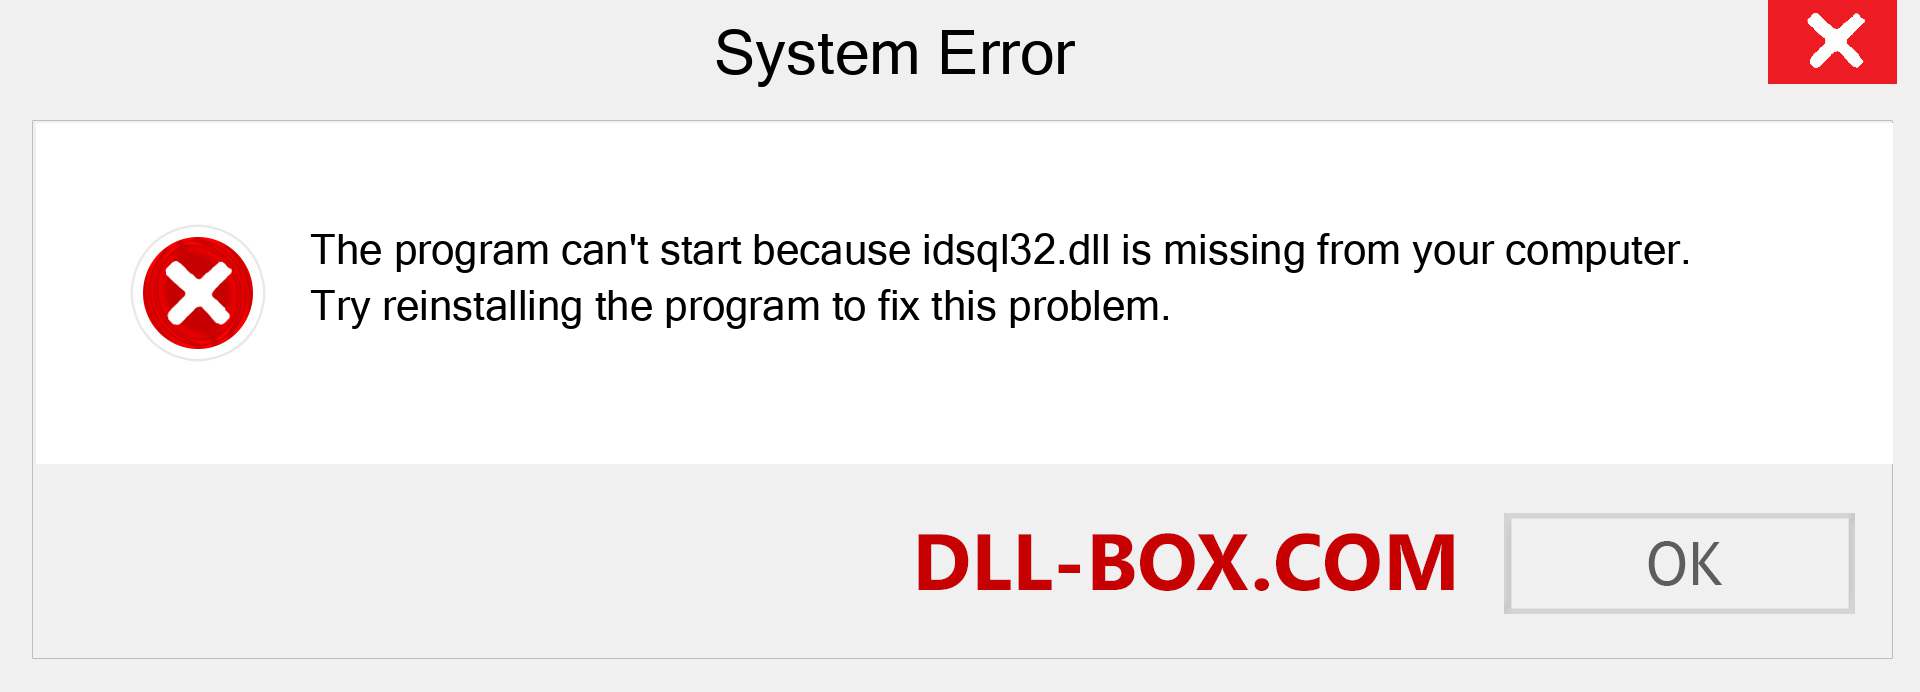  idsql32.dll file is missing?. Download for Windows 7, 8, 10 - Fix  idsql32 dll Missing Error on Windows, photos, images